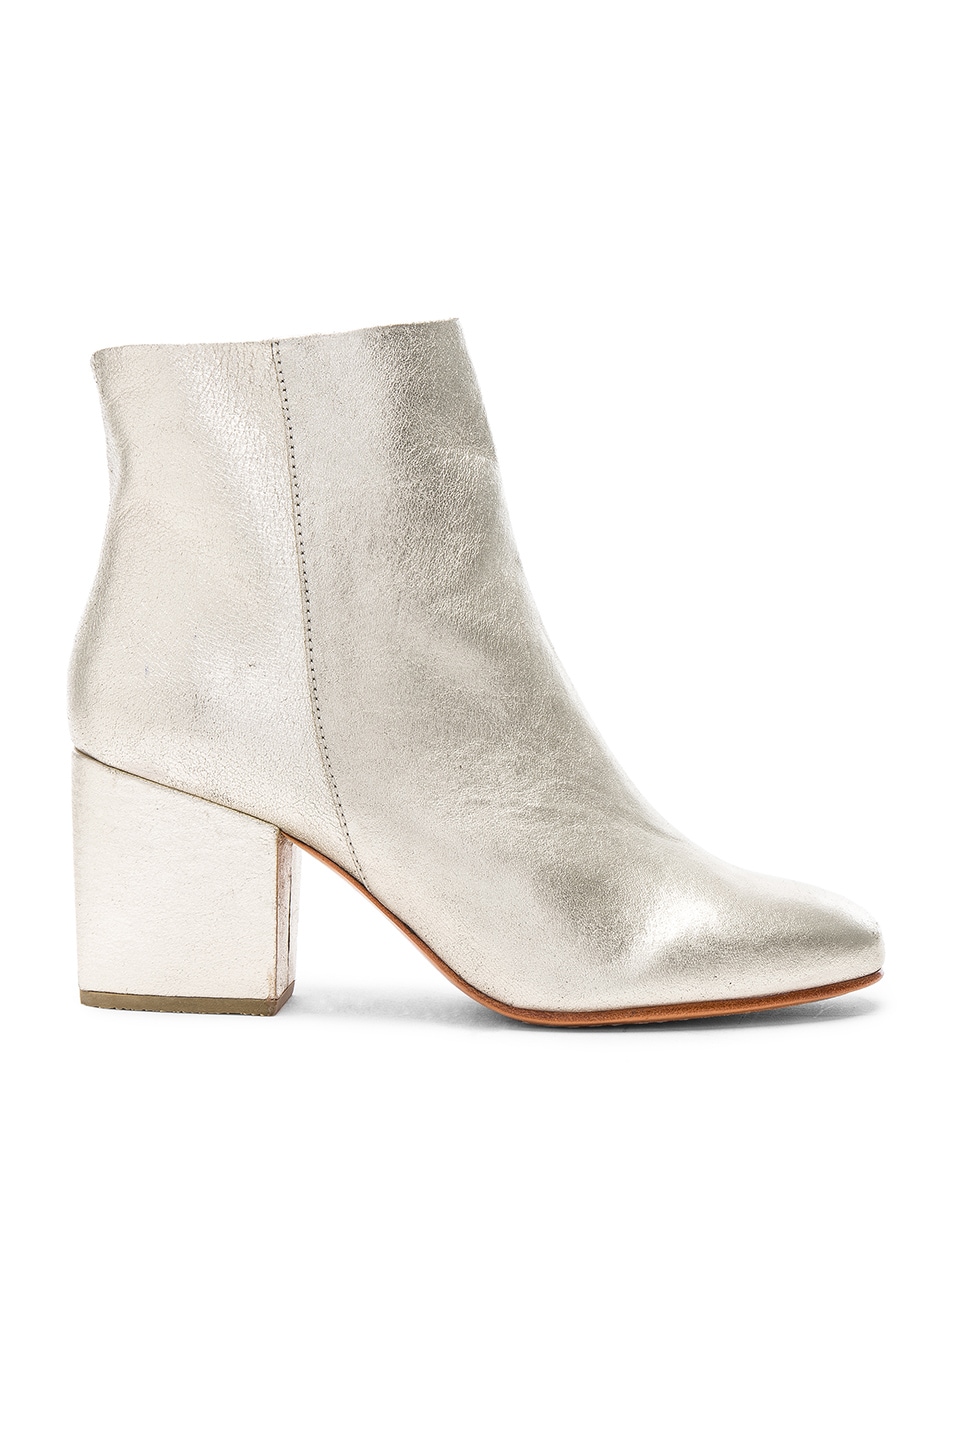 Image 1 of Rachel Comey Leather Pine Booties in White Gold